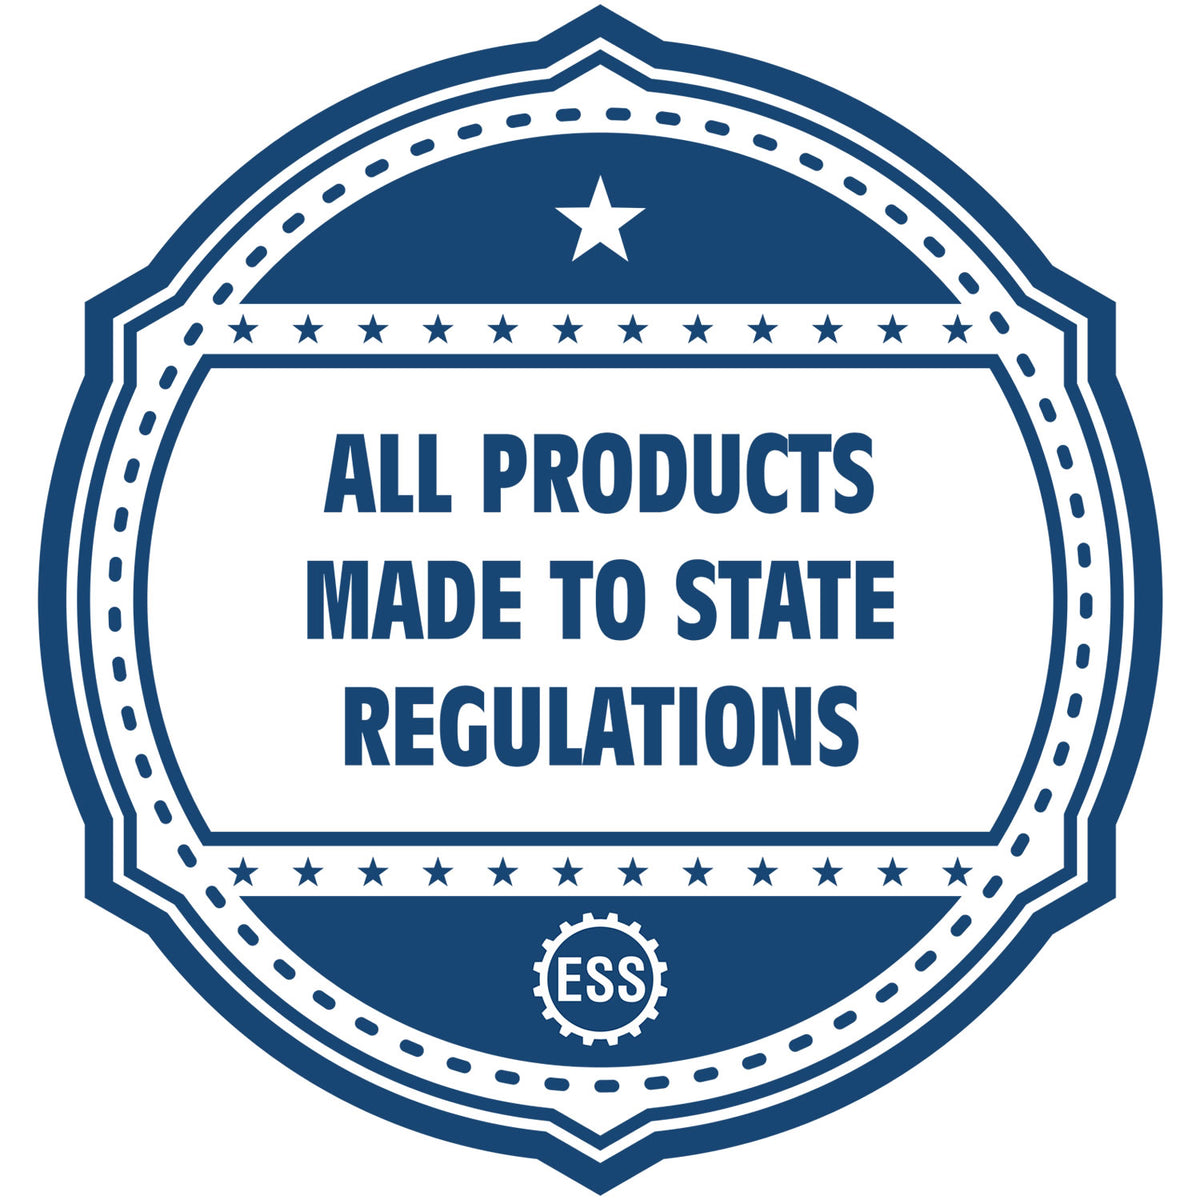 An icon or badge element for the Soft New Jersey Professional Engineer Seal showing that this product is made in compliance with state regulations.